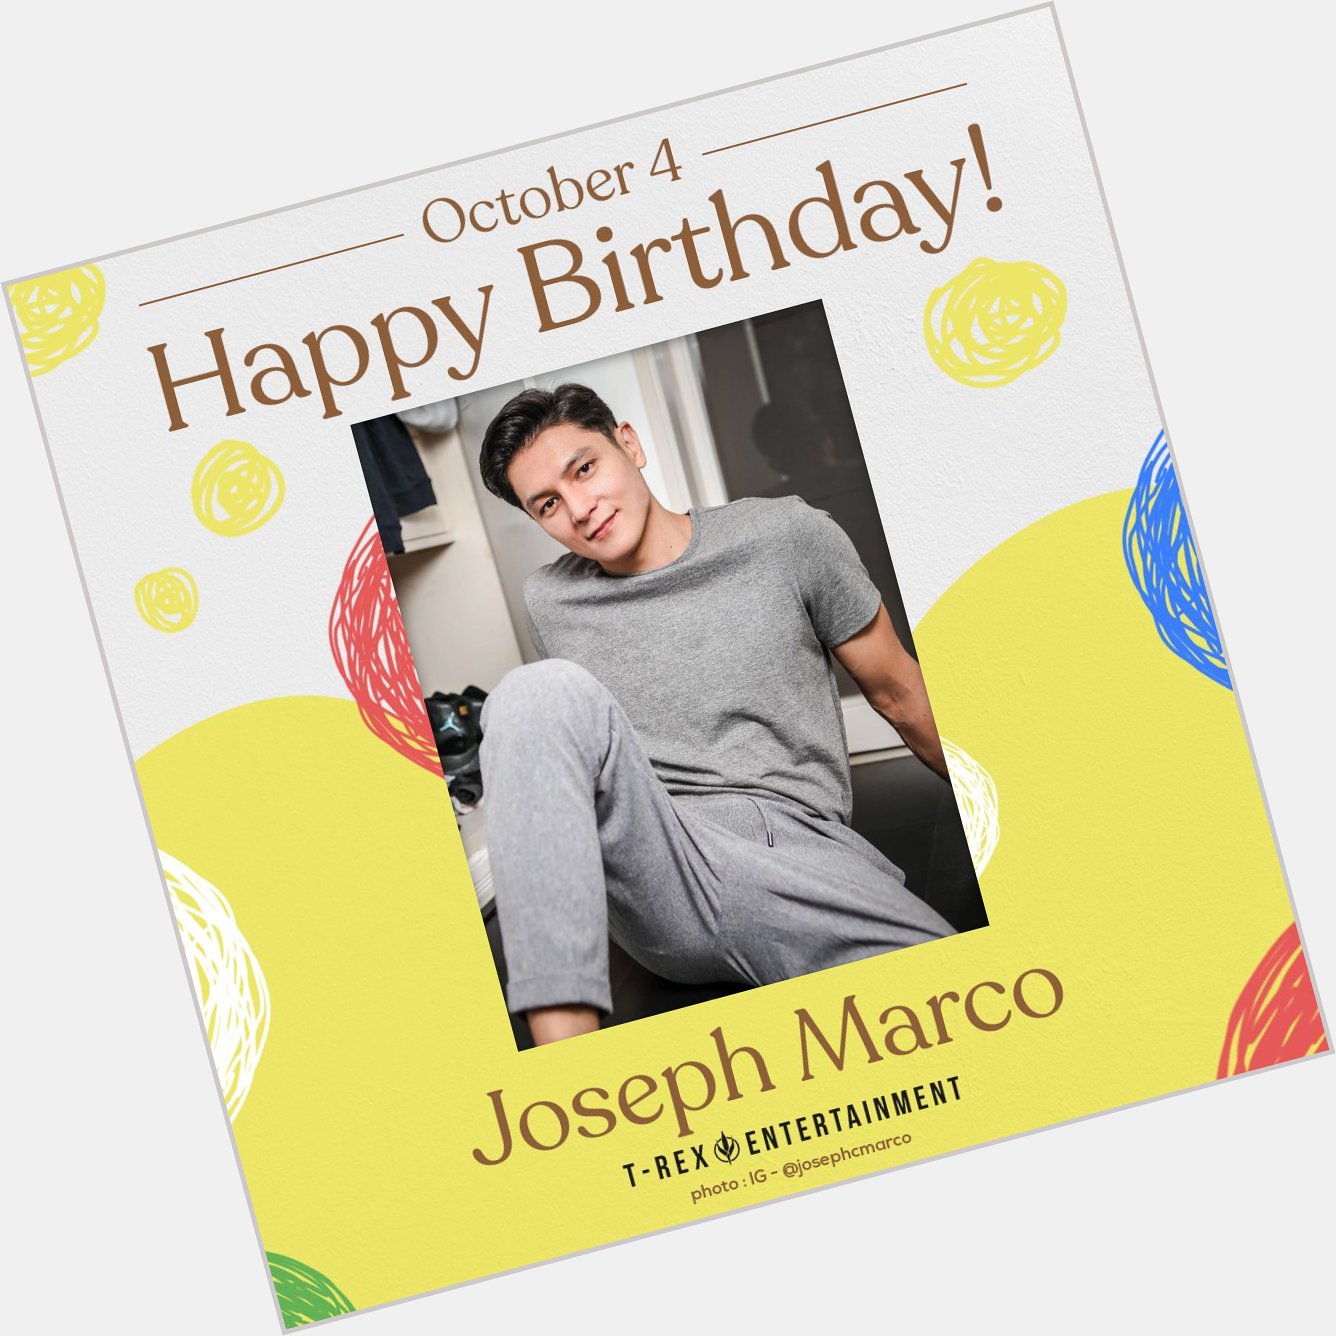 Happy birthday, Joseph Marco ! Trivia: His birth name is Joseph Cecil Marco. He turned 32 today. 